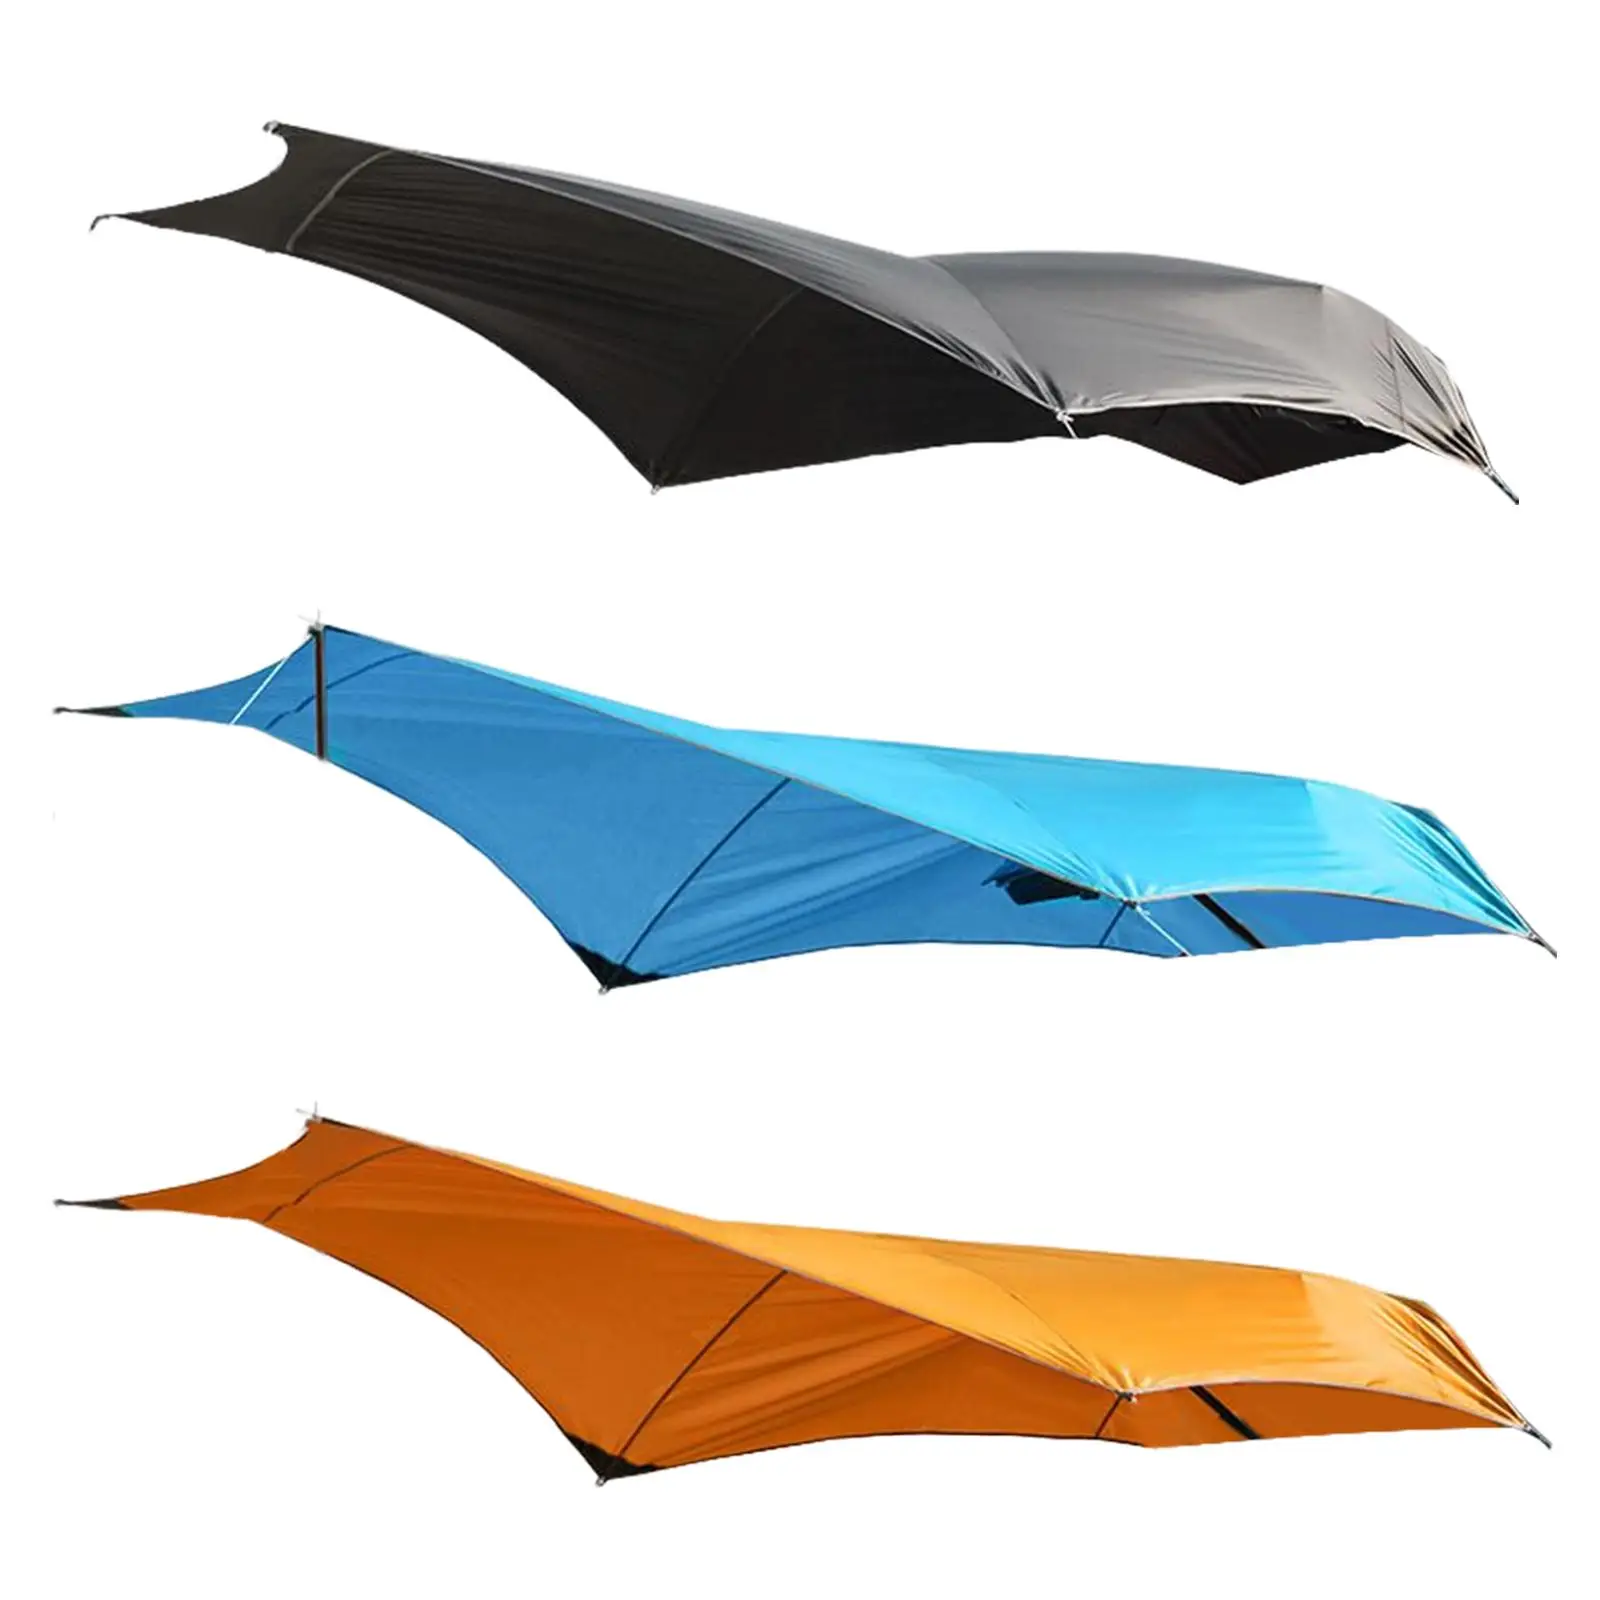 Outdoor Car Tent Rainproof Canopy Tarp Sunshade Shelter Waterproof Tail Extension Awning for Fishing Picnic Beach Hiking Camping